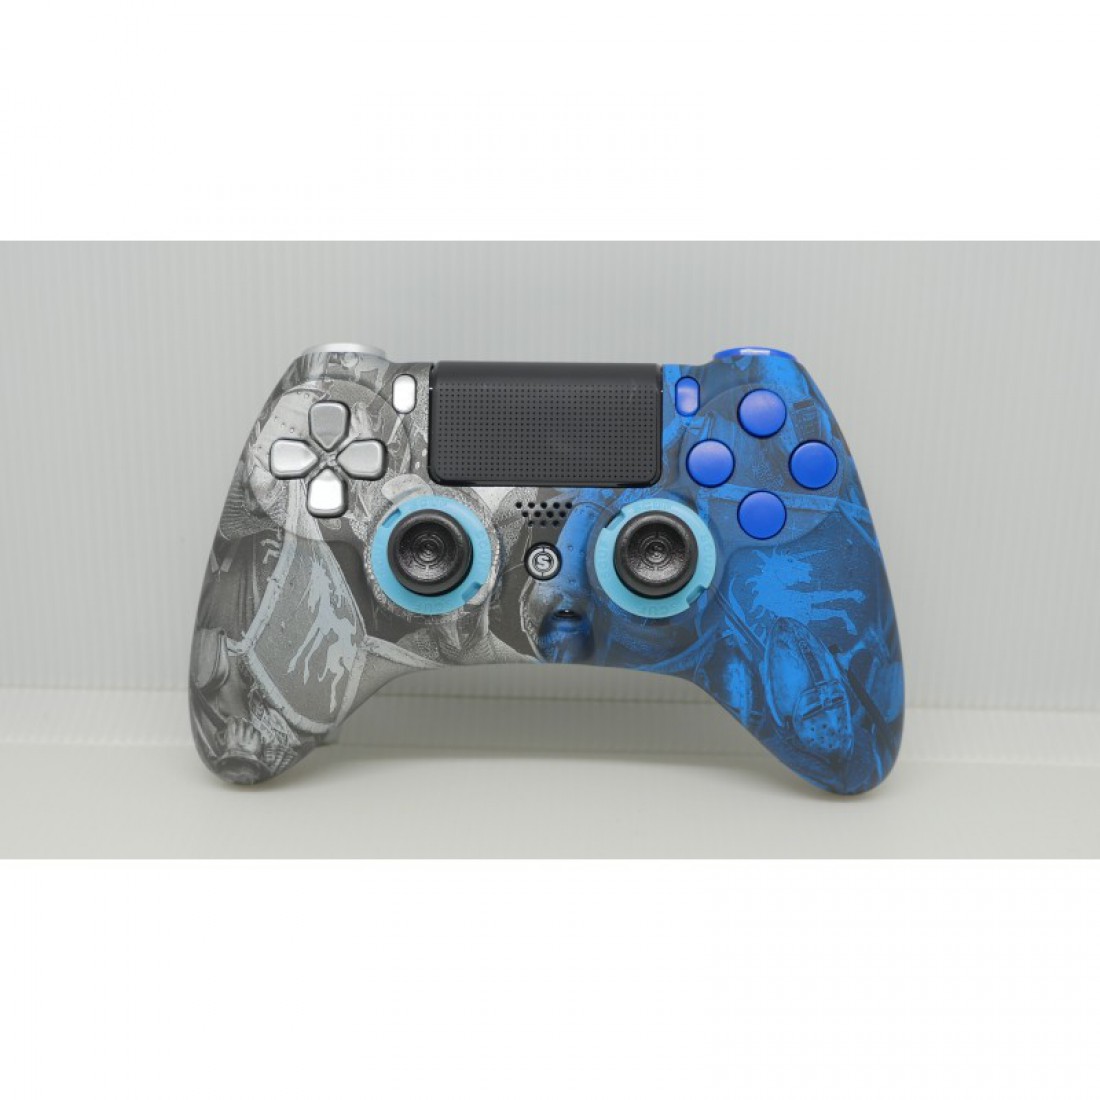 Scuf Impact Controller - Knights of Scuf | ICEGAMES